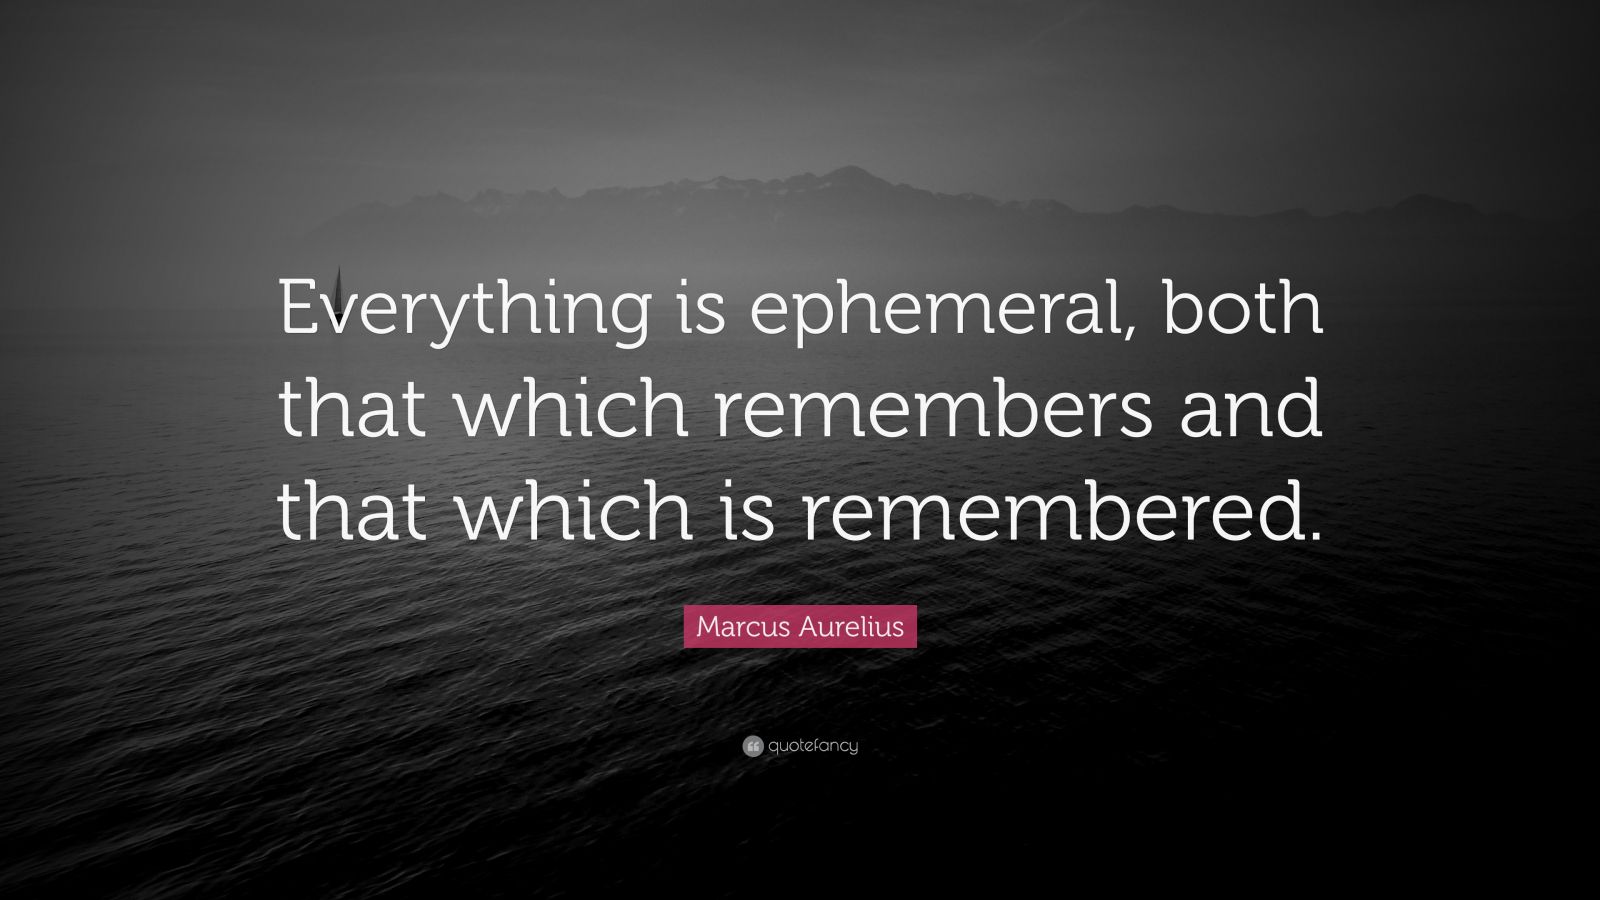 Marcus Aurelius Quote: “Everything is ephemeral, both that which ...